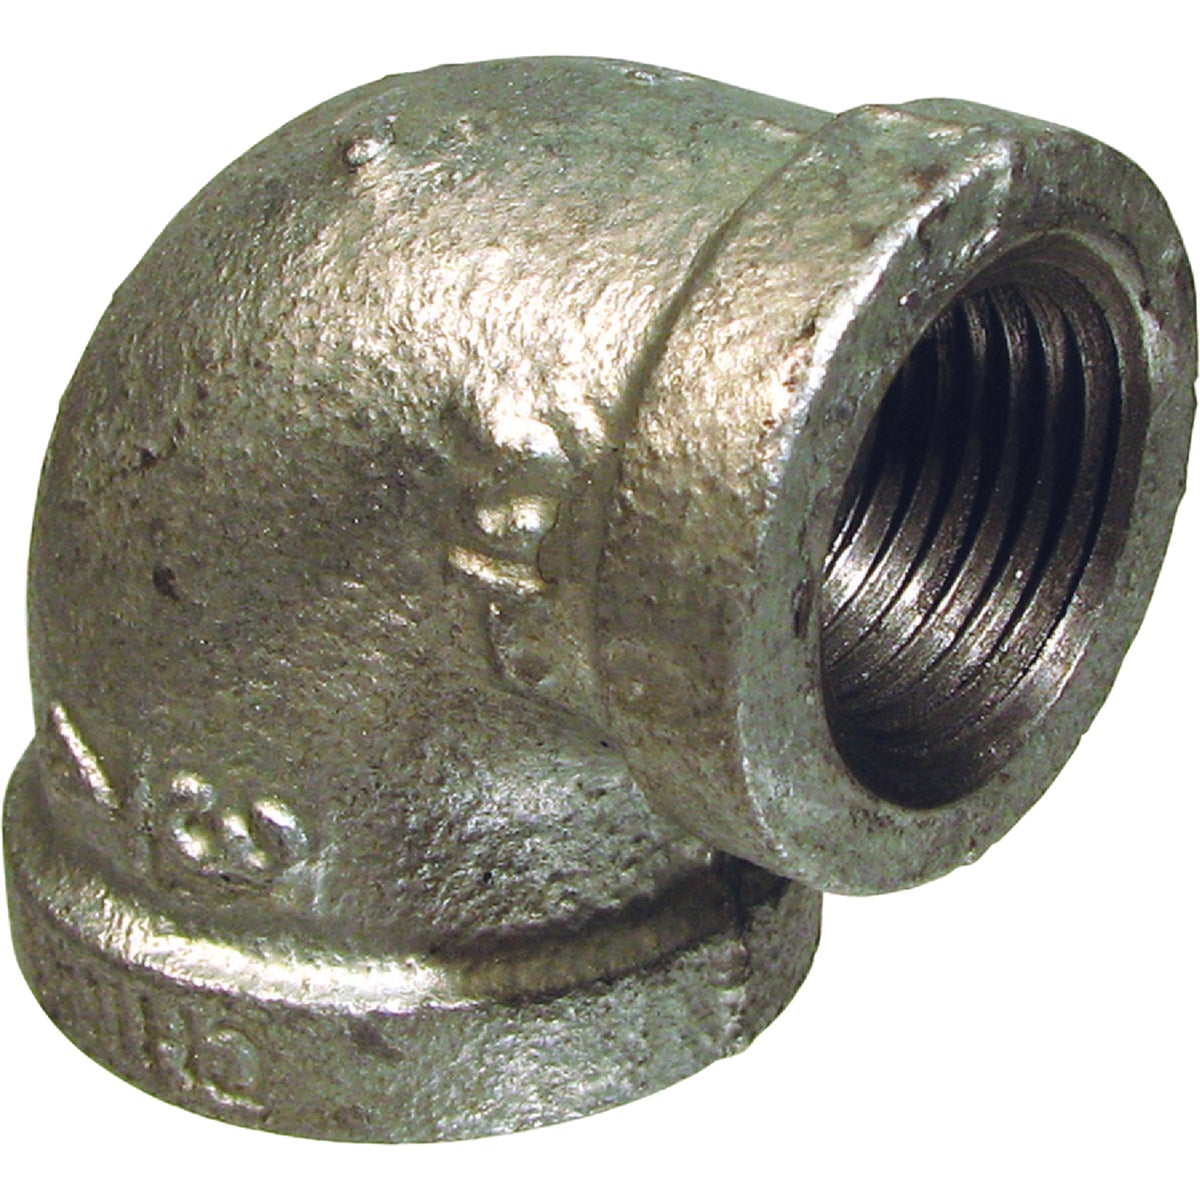 Southland 1-1/4 In. x 1 In. 90 Deg. Reducing Galvanized Elbow (1/4 Bend)